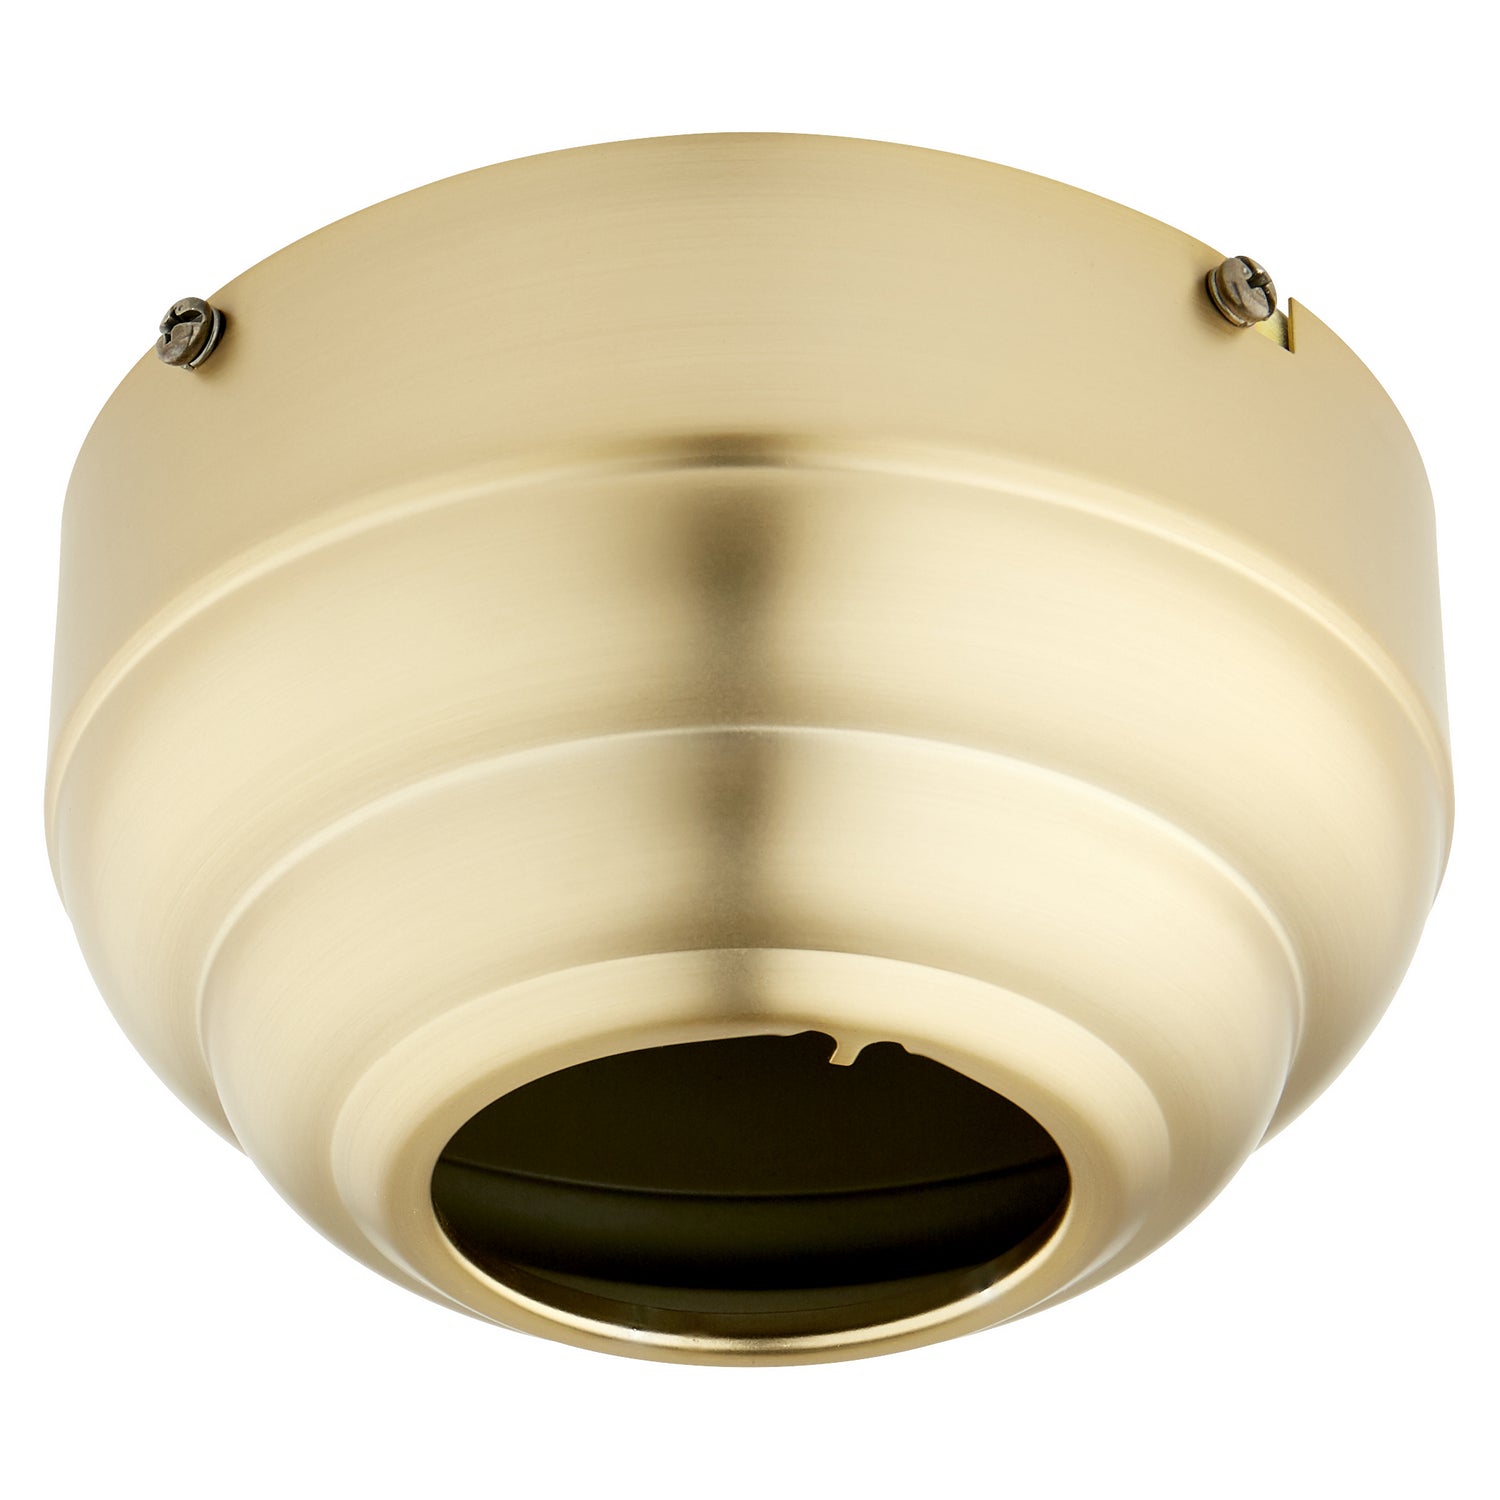 Quorum - 7-1745-80 - Slope Ceiling Adapter - CEILING ADAPTOR - Aged Brass